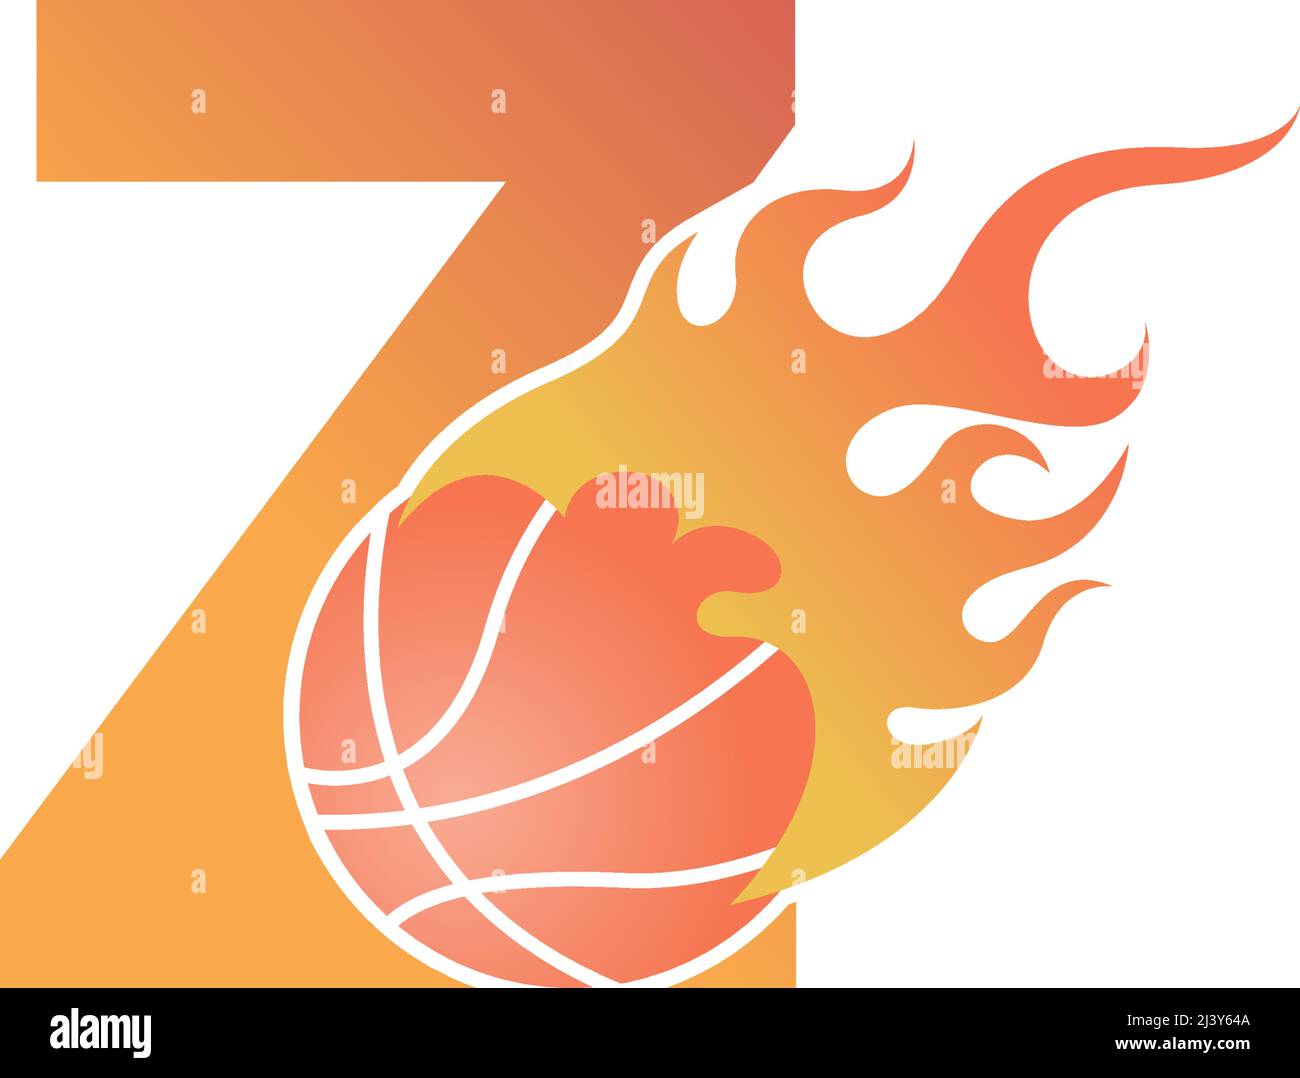 Letter Z with basketball ball on fire illustration vector Stock Vector